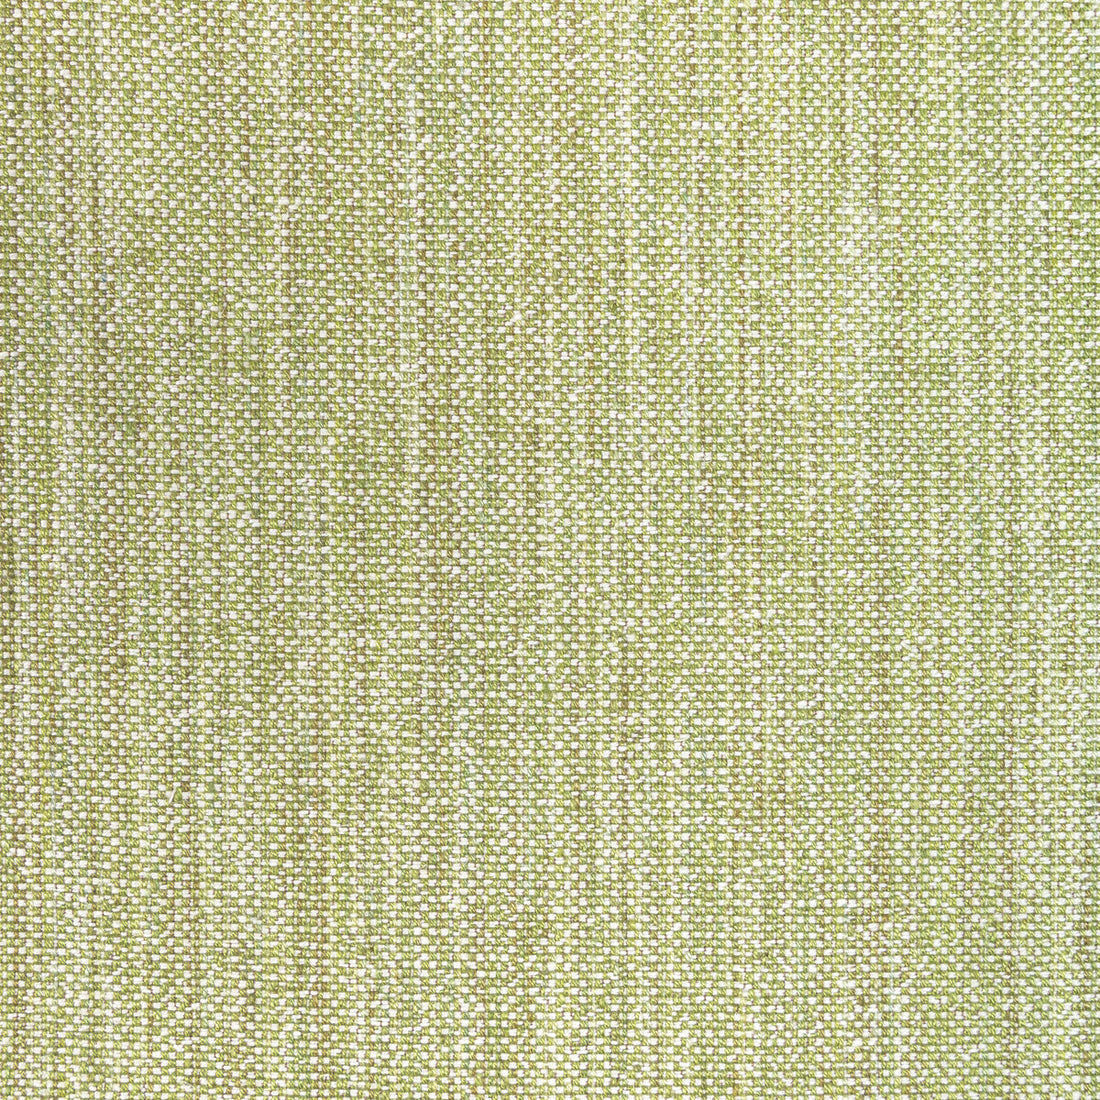 Rospico Plain fabric in leaf color - pattern 8022110.3.0 - by Brunschwig &amp; Fils in the Lorient Weaves collection